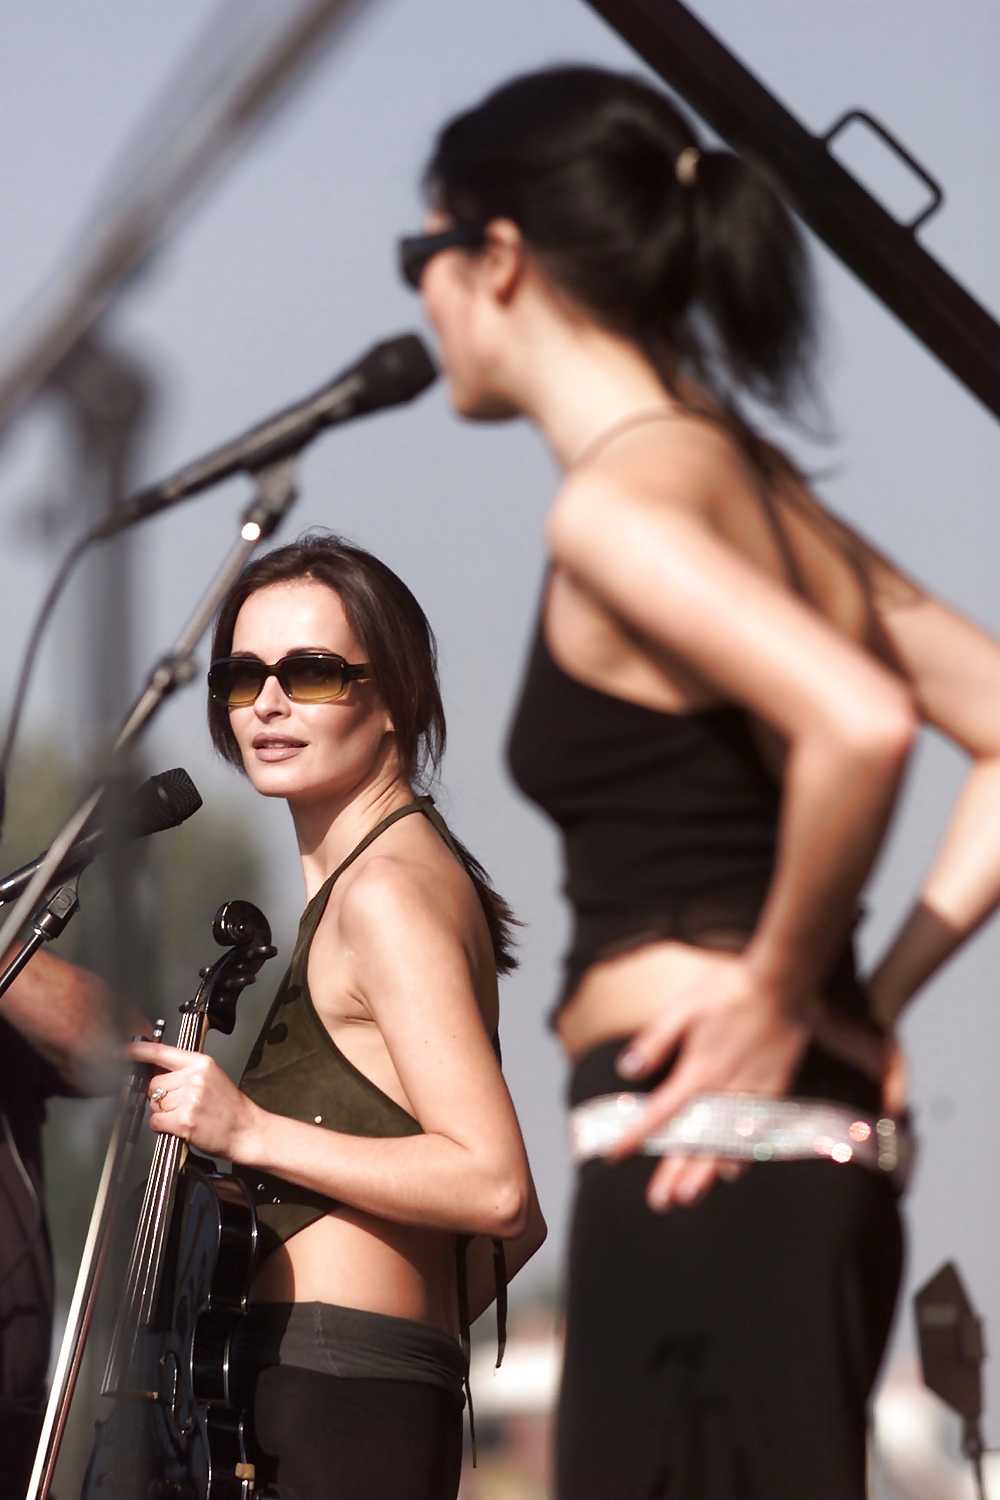 Ireland hottest celeb Andrea Corr. Can you say she isnt? #25939234